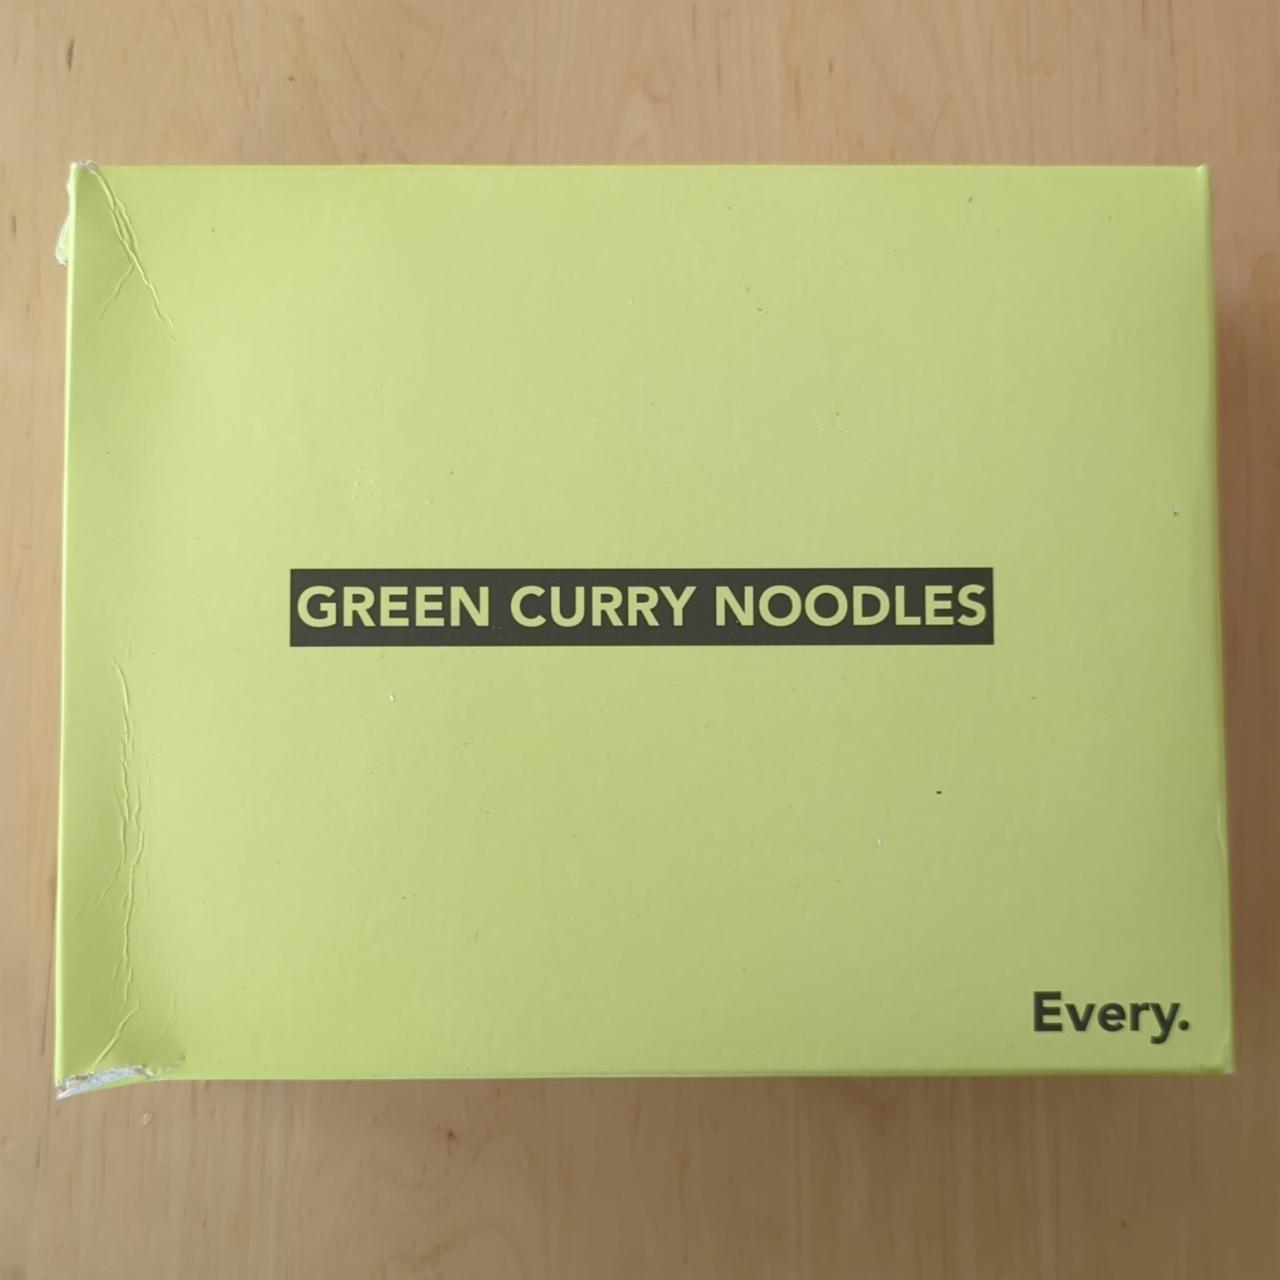 Fotografie - Green Curry Noodles Every.